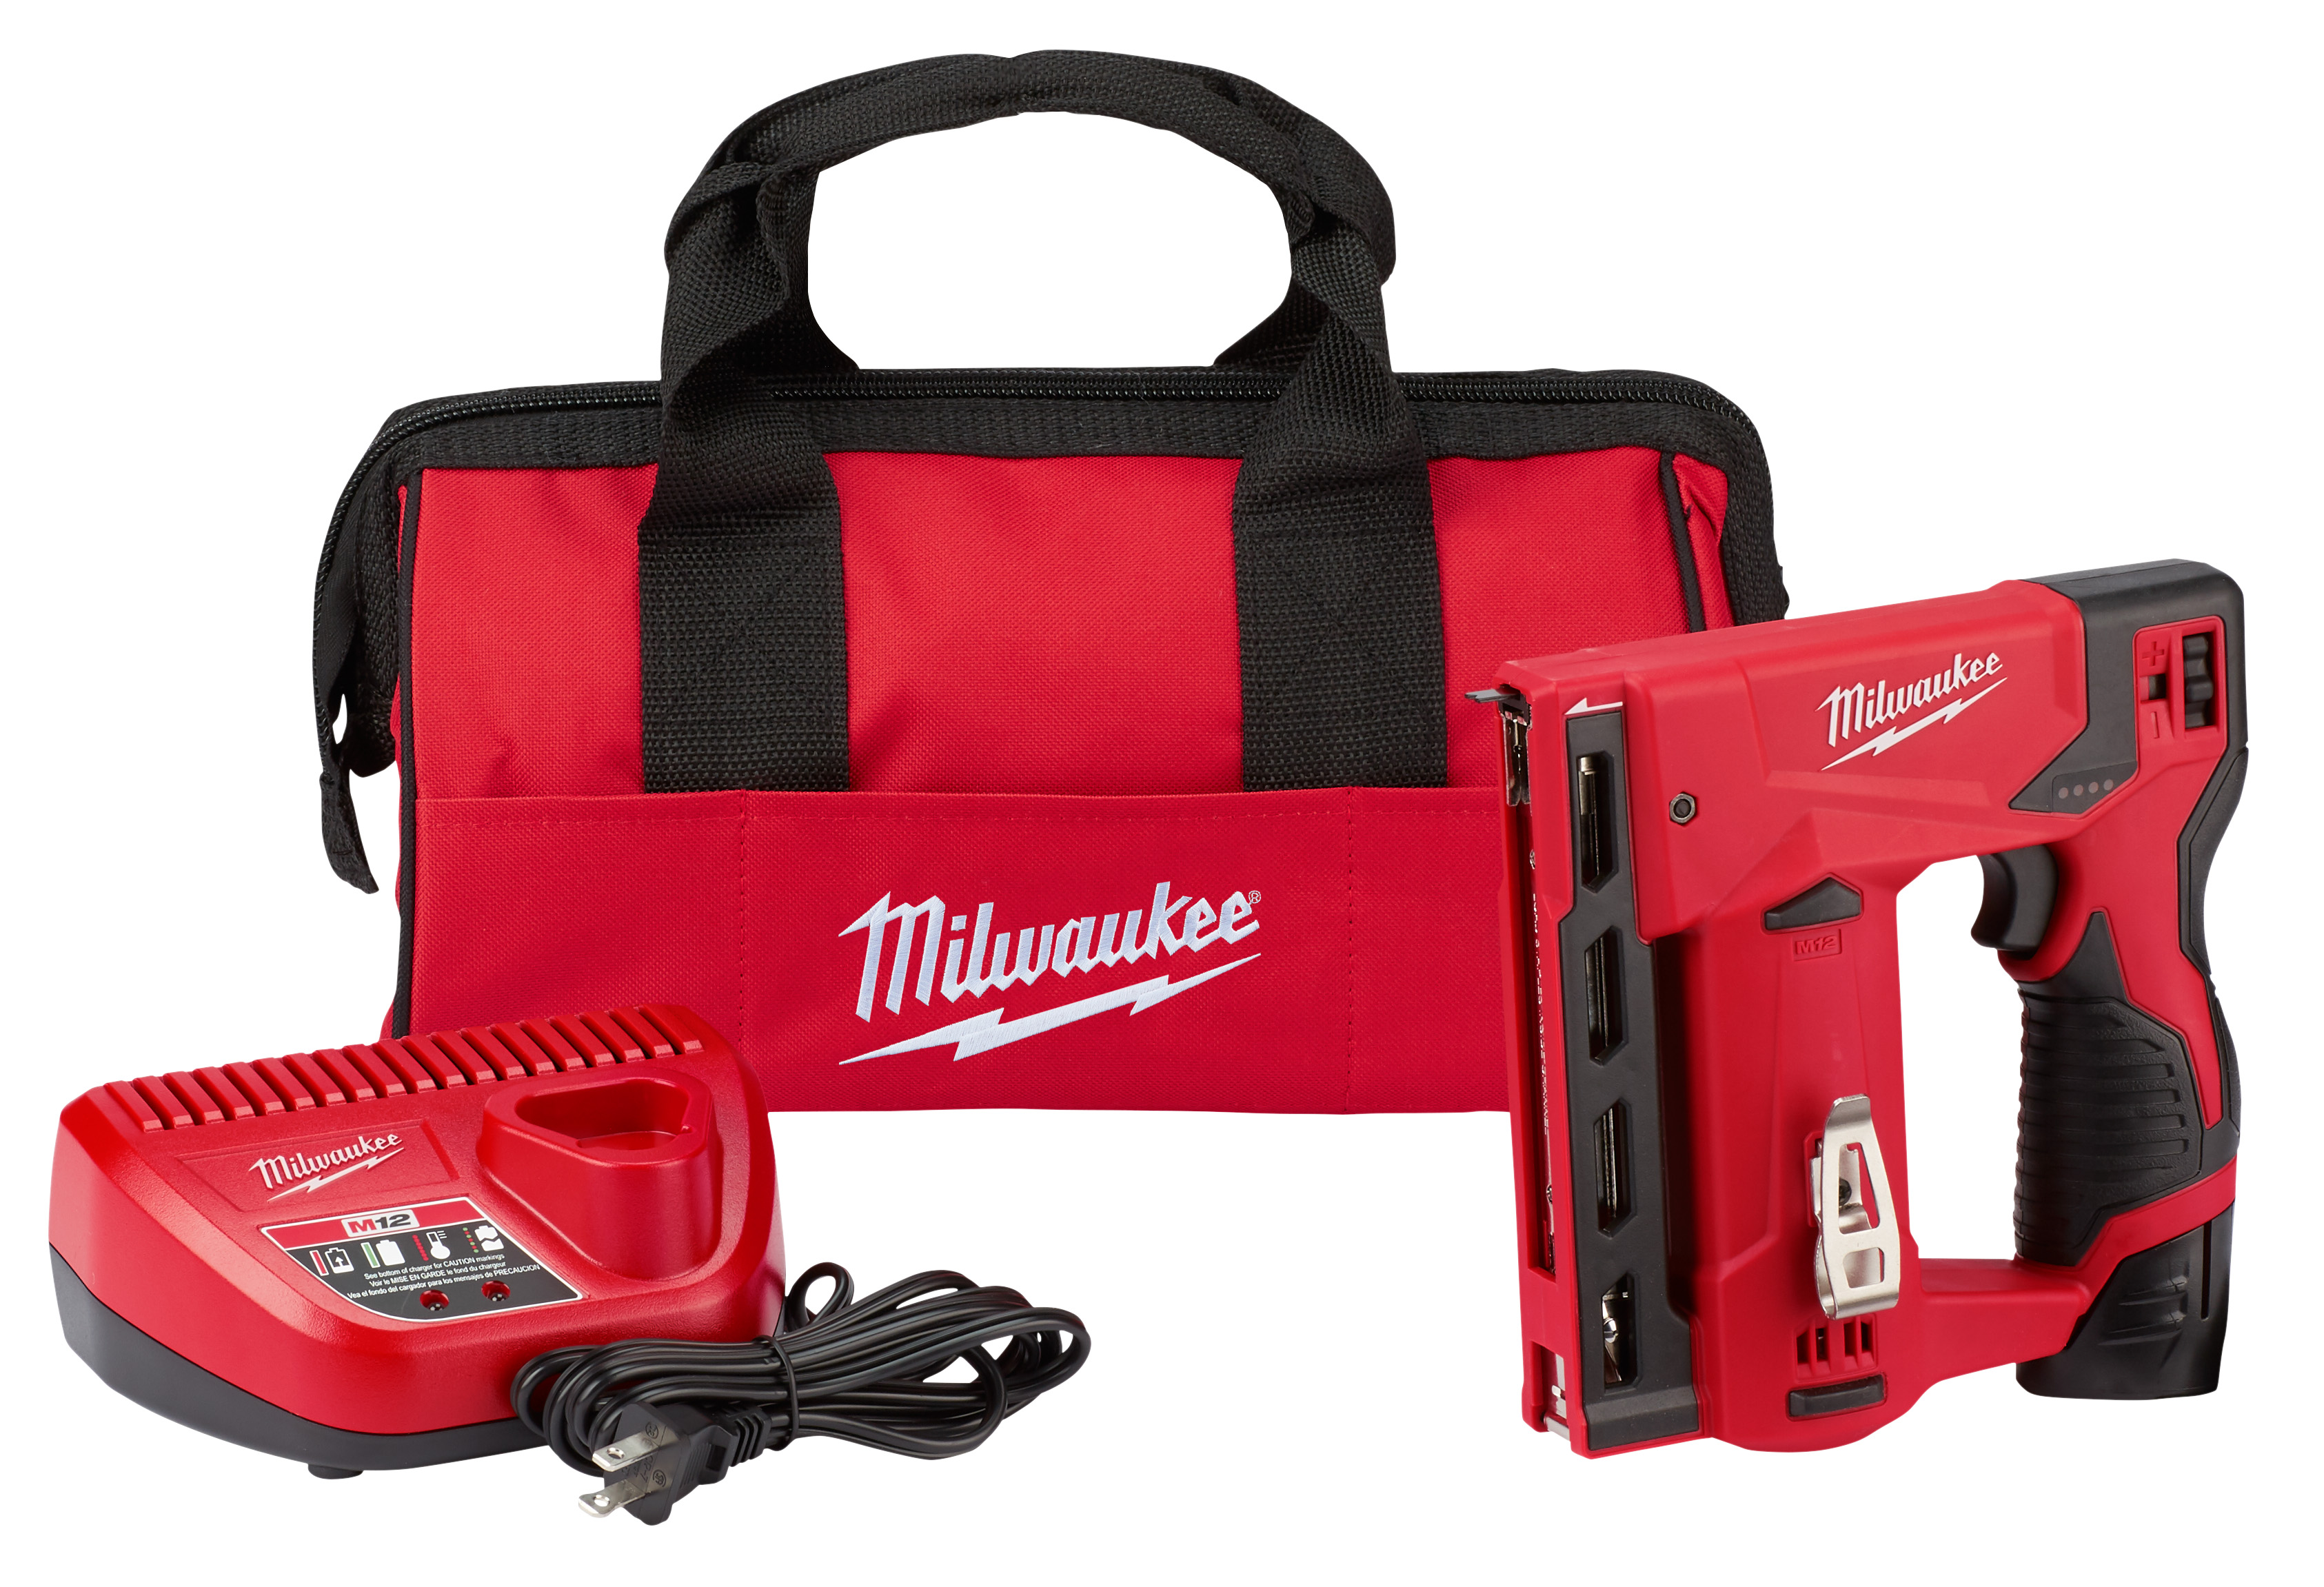 The Milwaukee M12™ 3/8 in. crown stapler delivers a true hand tool replacement. The 2447 is designed to drive a range of 3/8 in. flat crown staples (1/4 in. – 9/16 in.) through an array of materials and substrates. At just 3.0 lbs. and 7.6 in. long the compact design allows for great access into tight spaces and convenient tool belt portability. An easy to squeeze trigger design significantly reduces fatigue associated with traditional hand staplers. Integrated sequential and contact actuation trigger design provides increased productivity and seamless changing between firing modes. The 2447 is compatible with all Milwaukee M12™ batteries, and carries Milwaukee's 5-year limited power tool warranty.